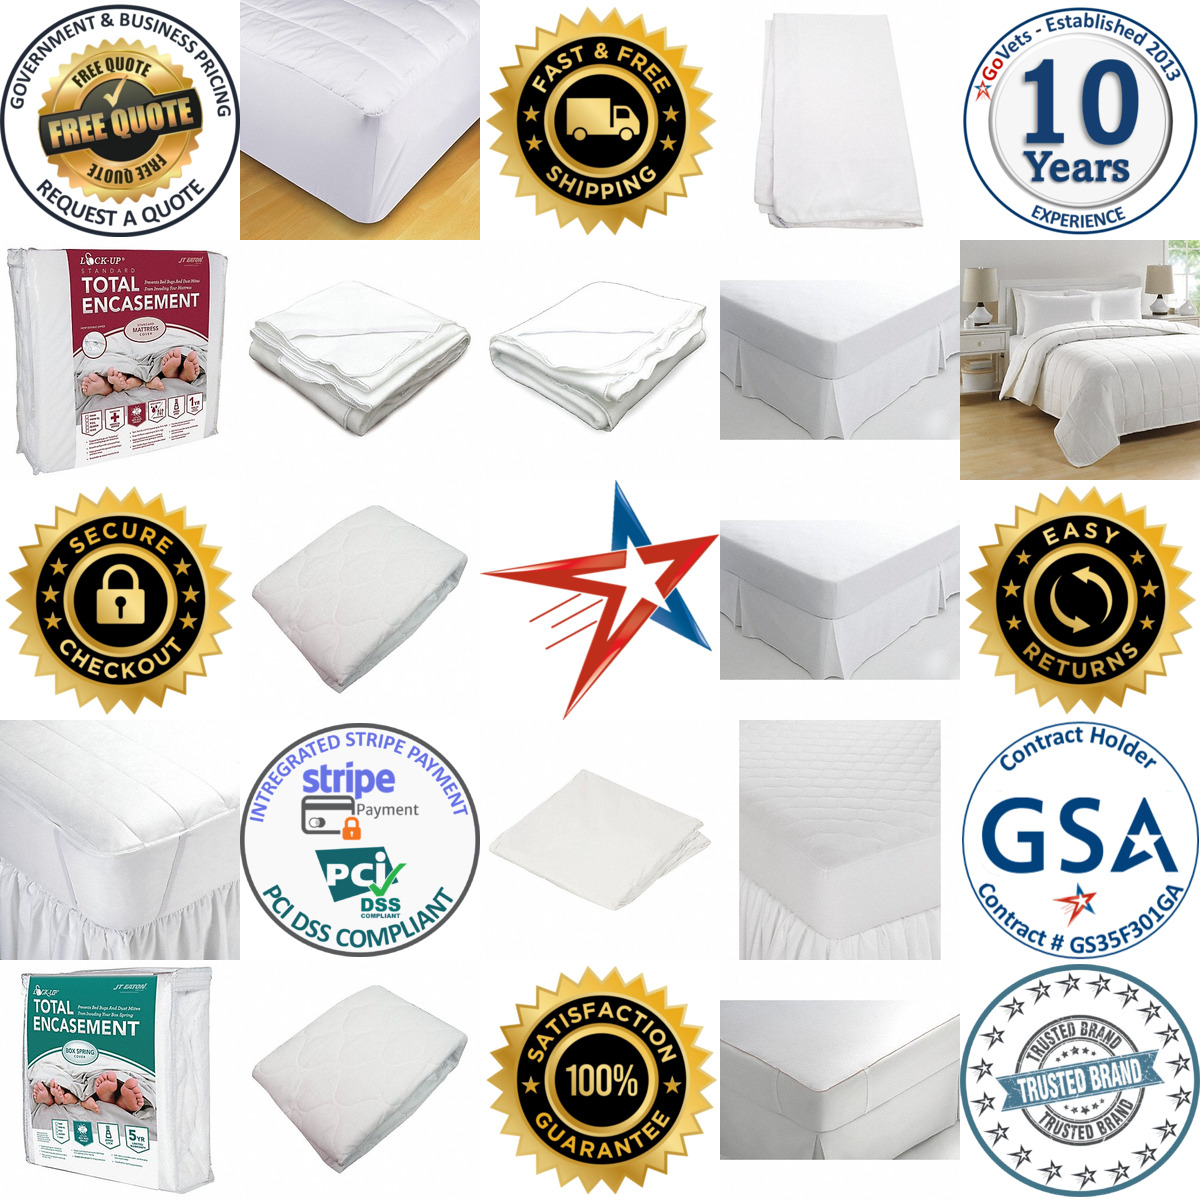 A selection of Mattress and Pillow Protectors products on GoVets